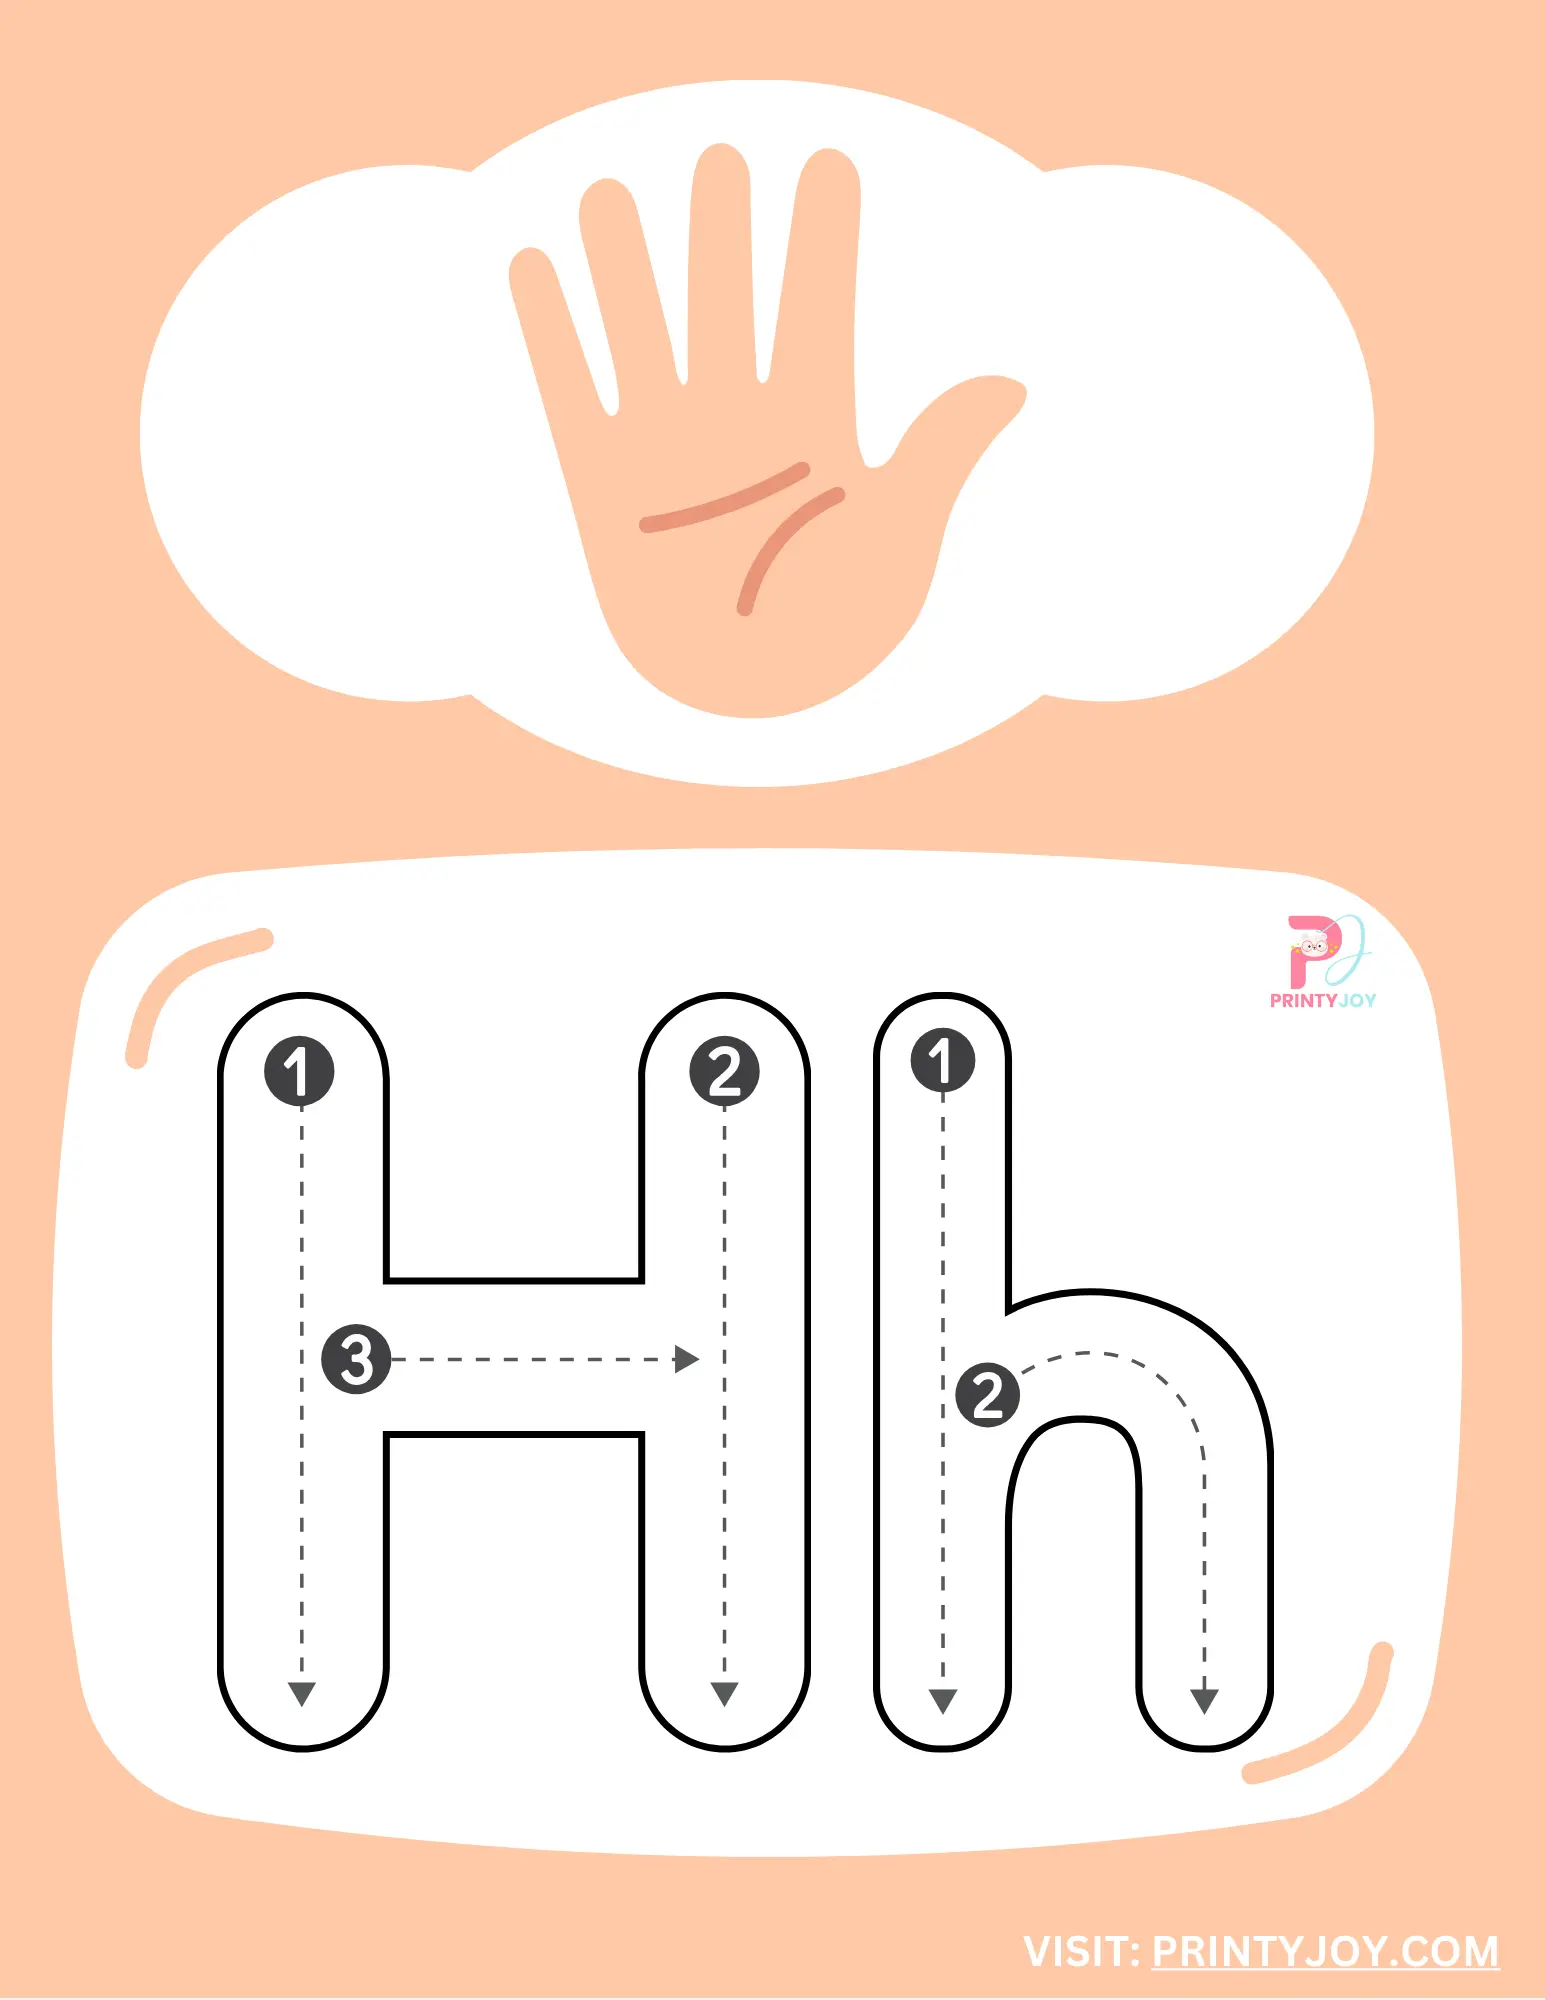 Alphabet Tracing Posters Printable Free